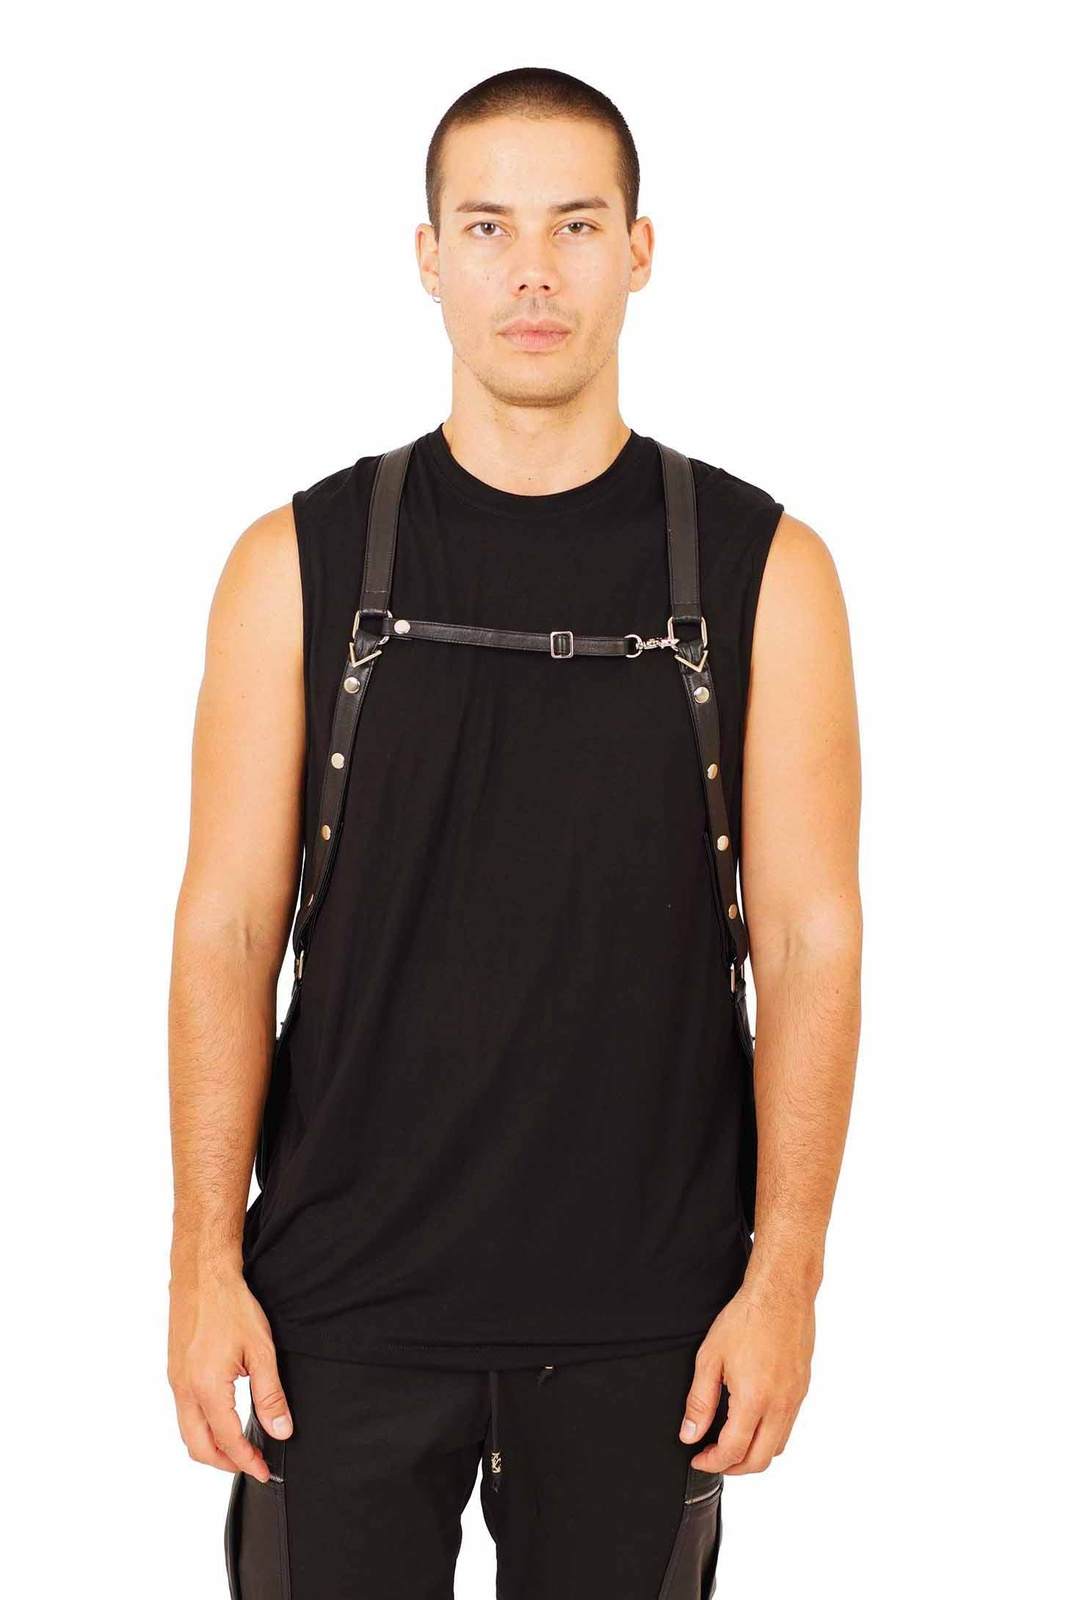 Black Leather Shoulder Holster Bags from Love Khaos